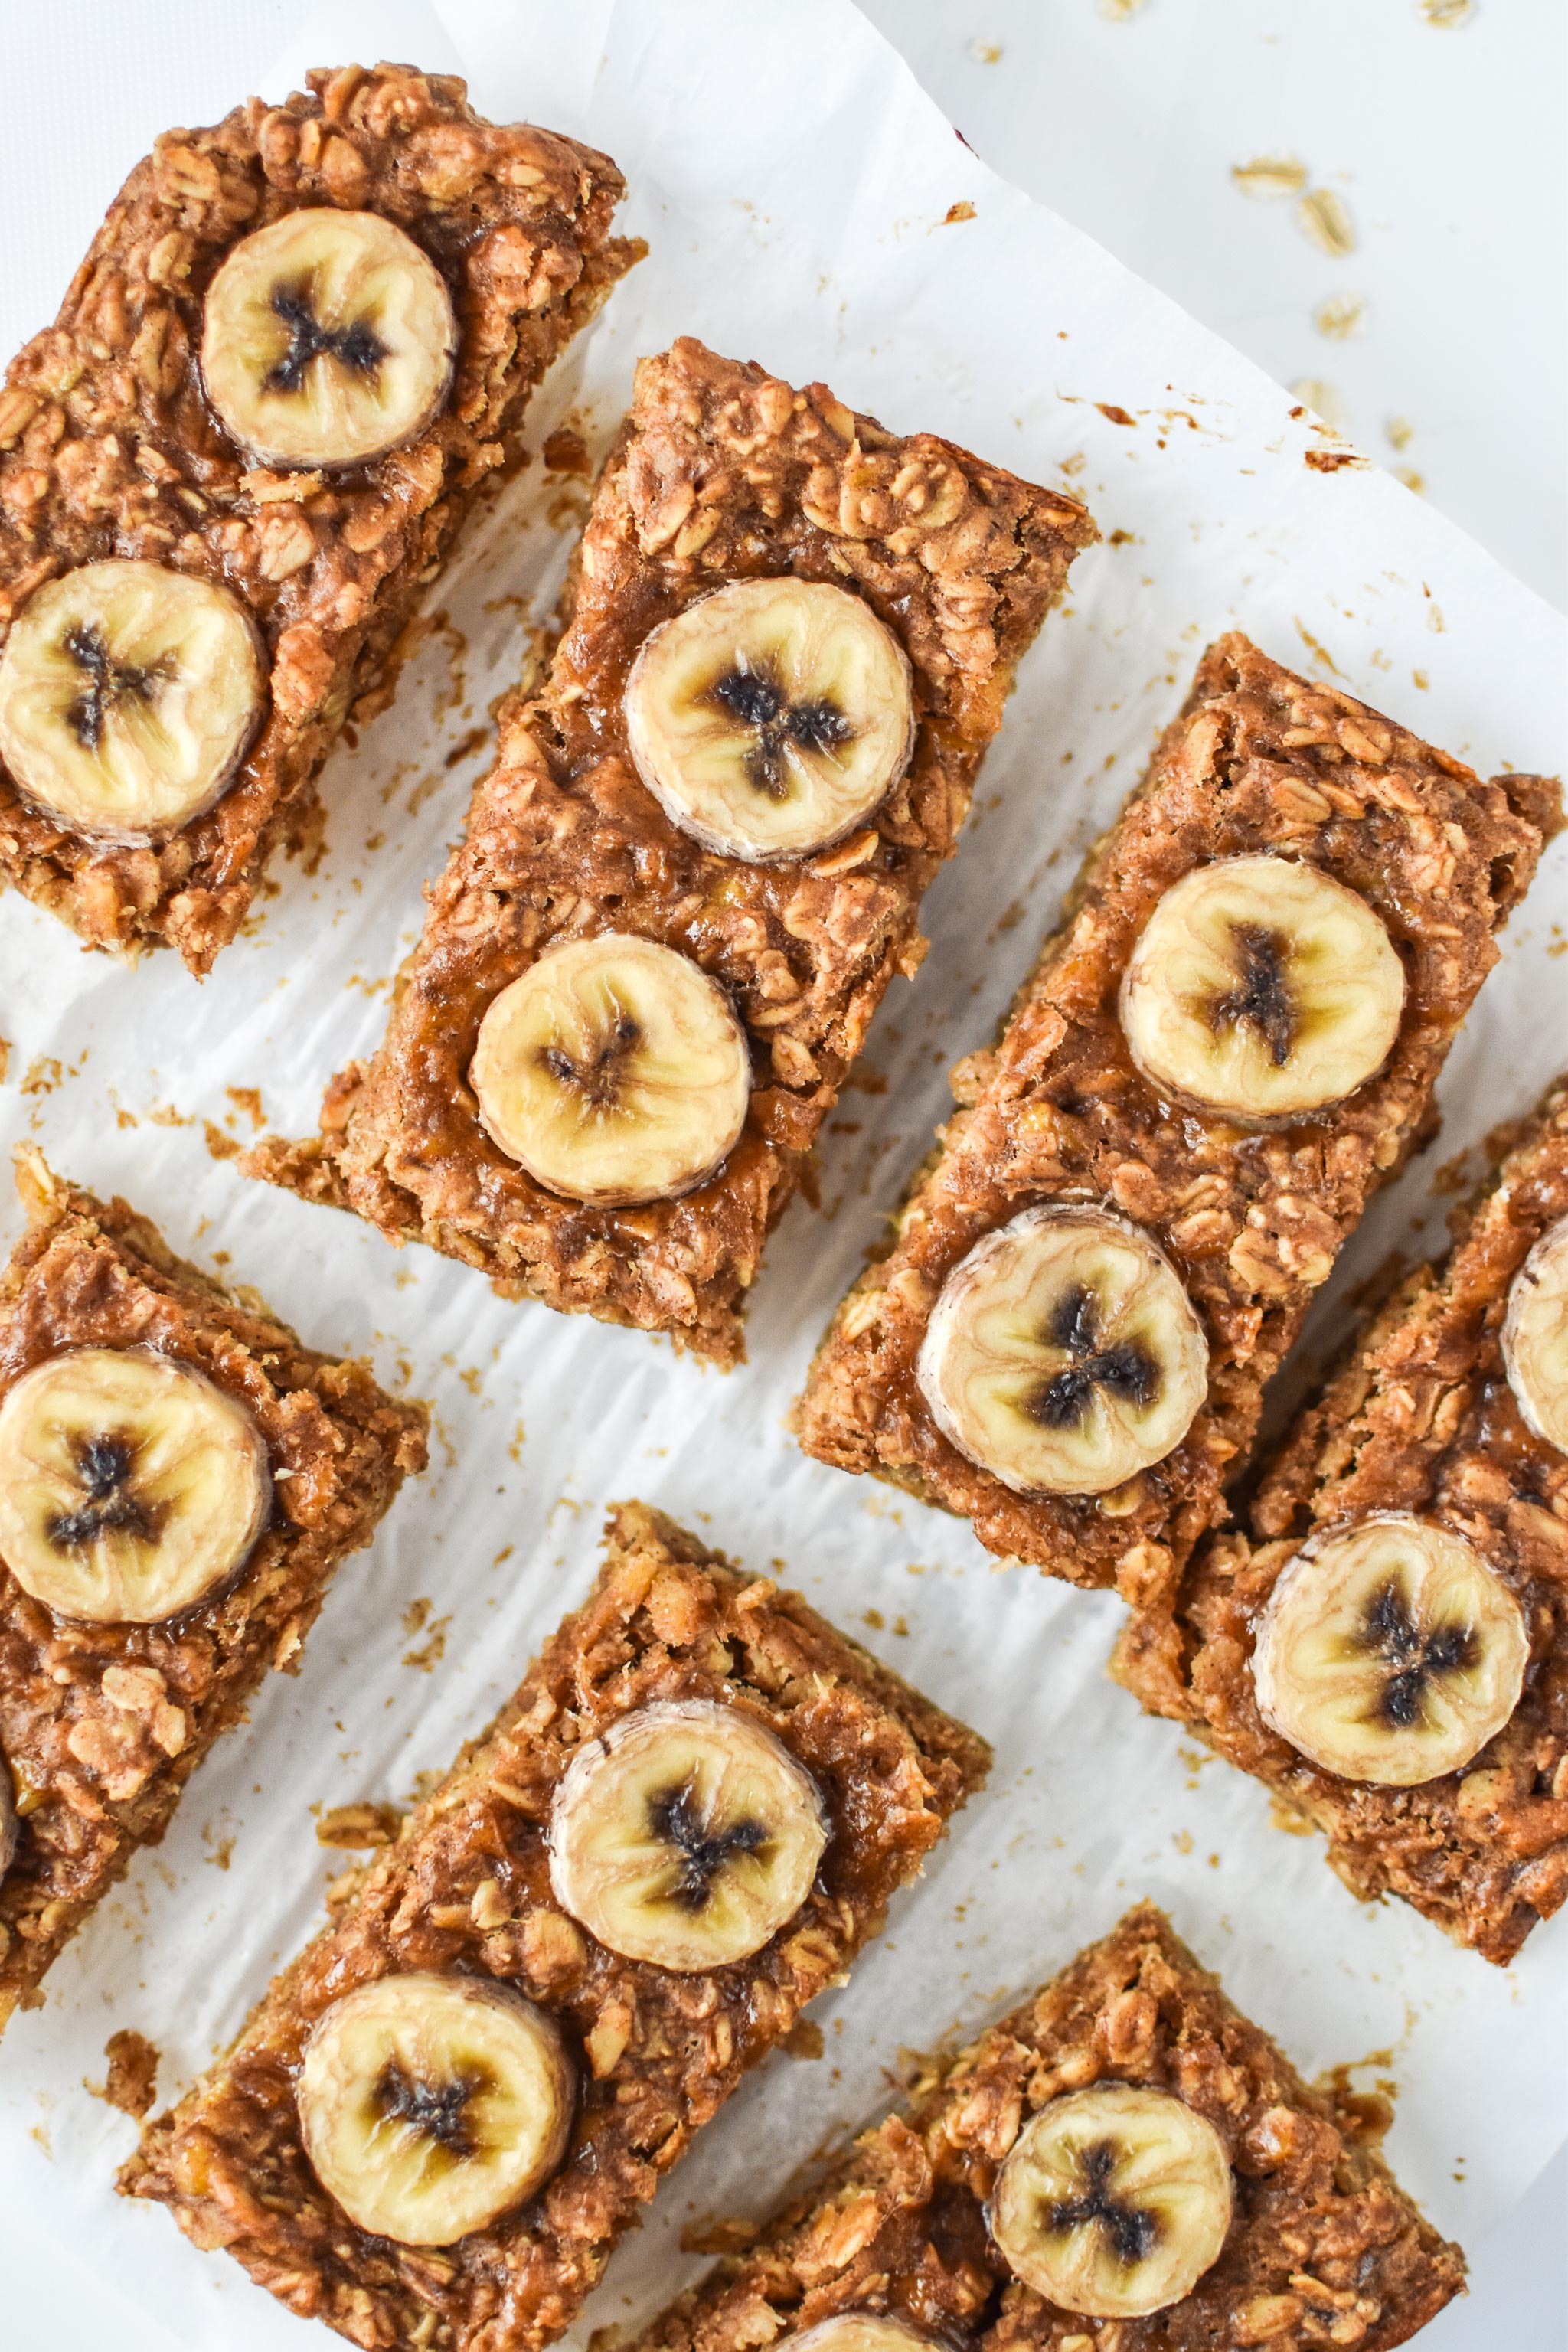 Banana Oatmeal Breakfast Bars fresh from the oven and cut into bars.